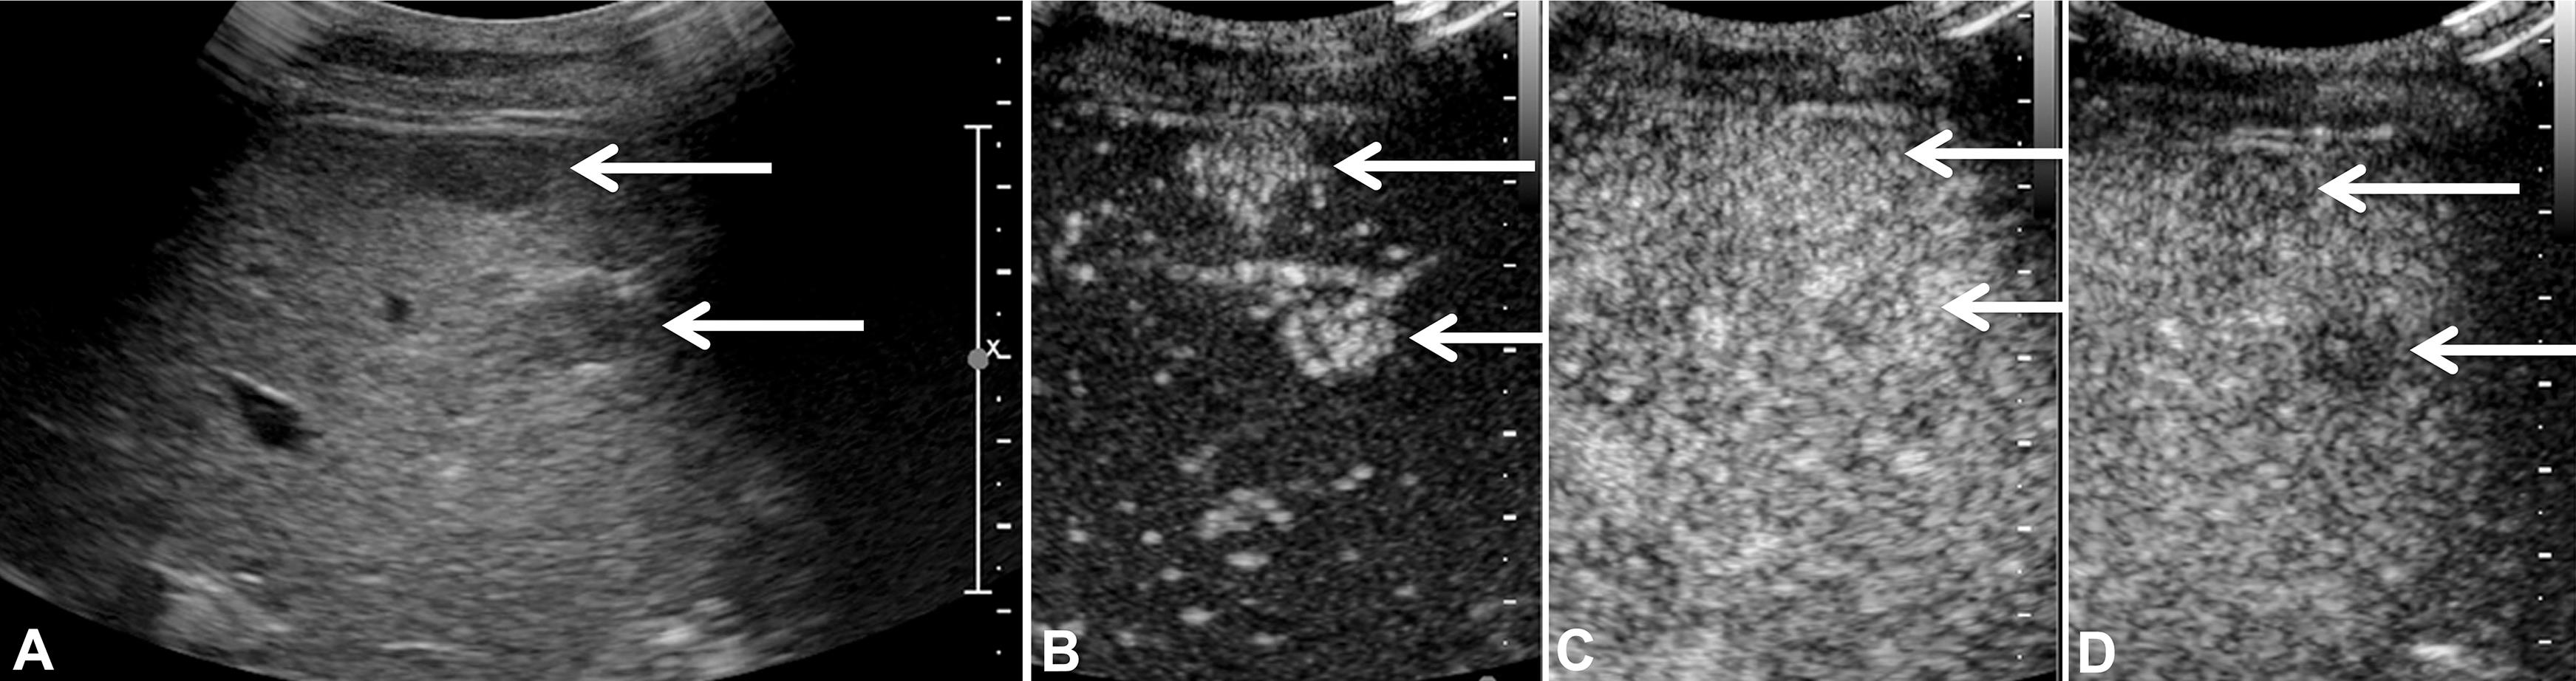 Contrast-enhanced ultrasound in a 48 year-old man with cirrhosis.